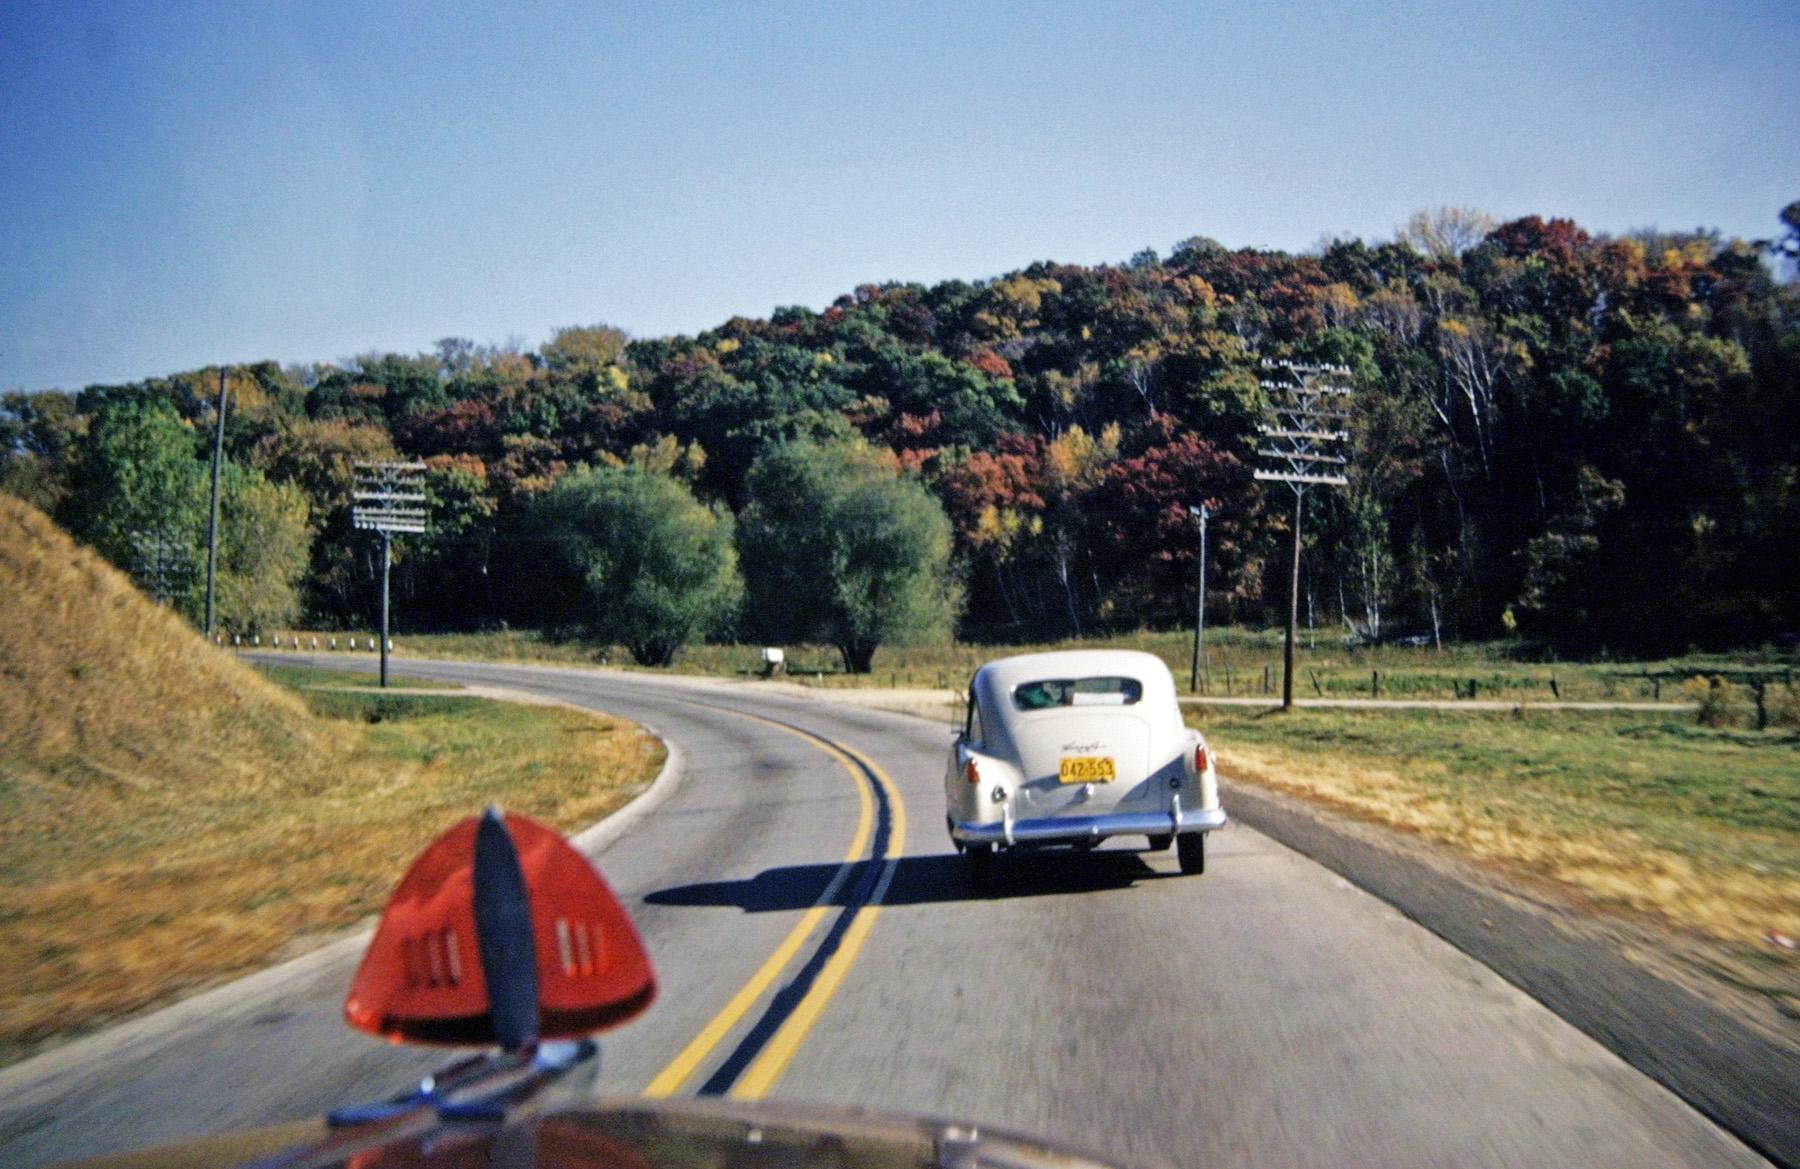 October 1953, on US 61 south of Hastings, Minnesota. The new Henry J with Wisconsin plates is flailing along on all four cylinders, but getting great gas mileage. We'll pass as soon as we get around this curve. Who remembers bug deflectors? View full size.